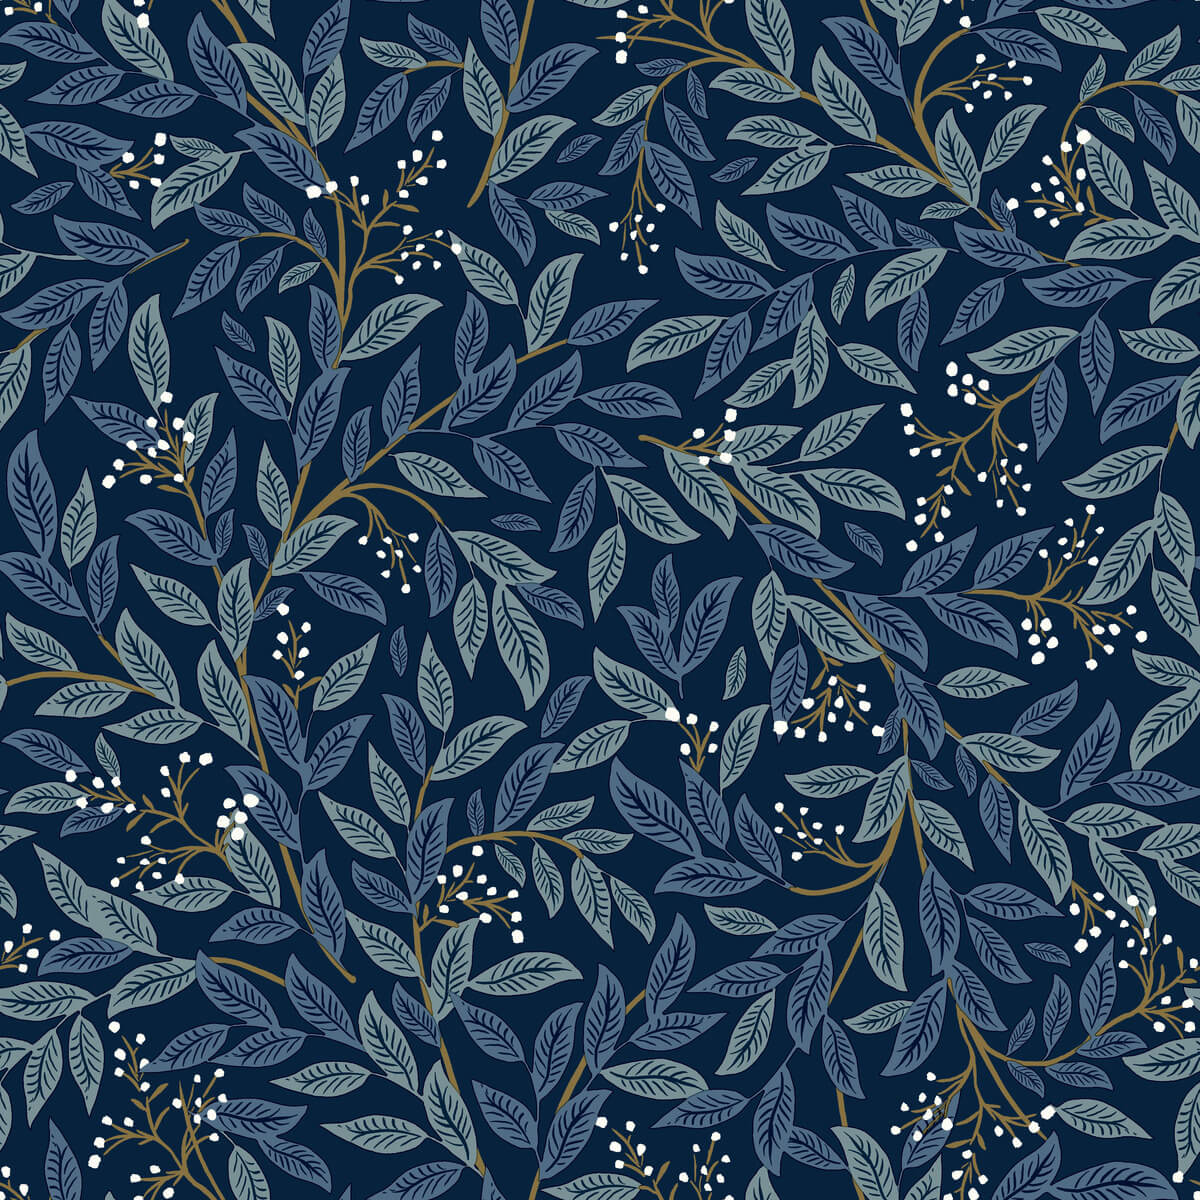 Rifle Paper Co. Second Edition Peel & Stick Wallpaper - SAMPLE